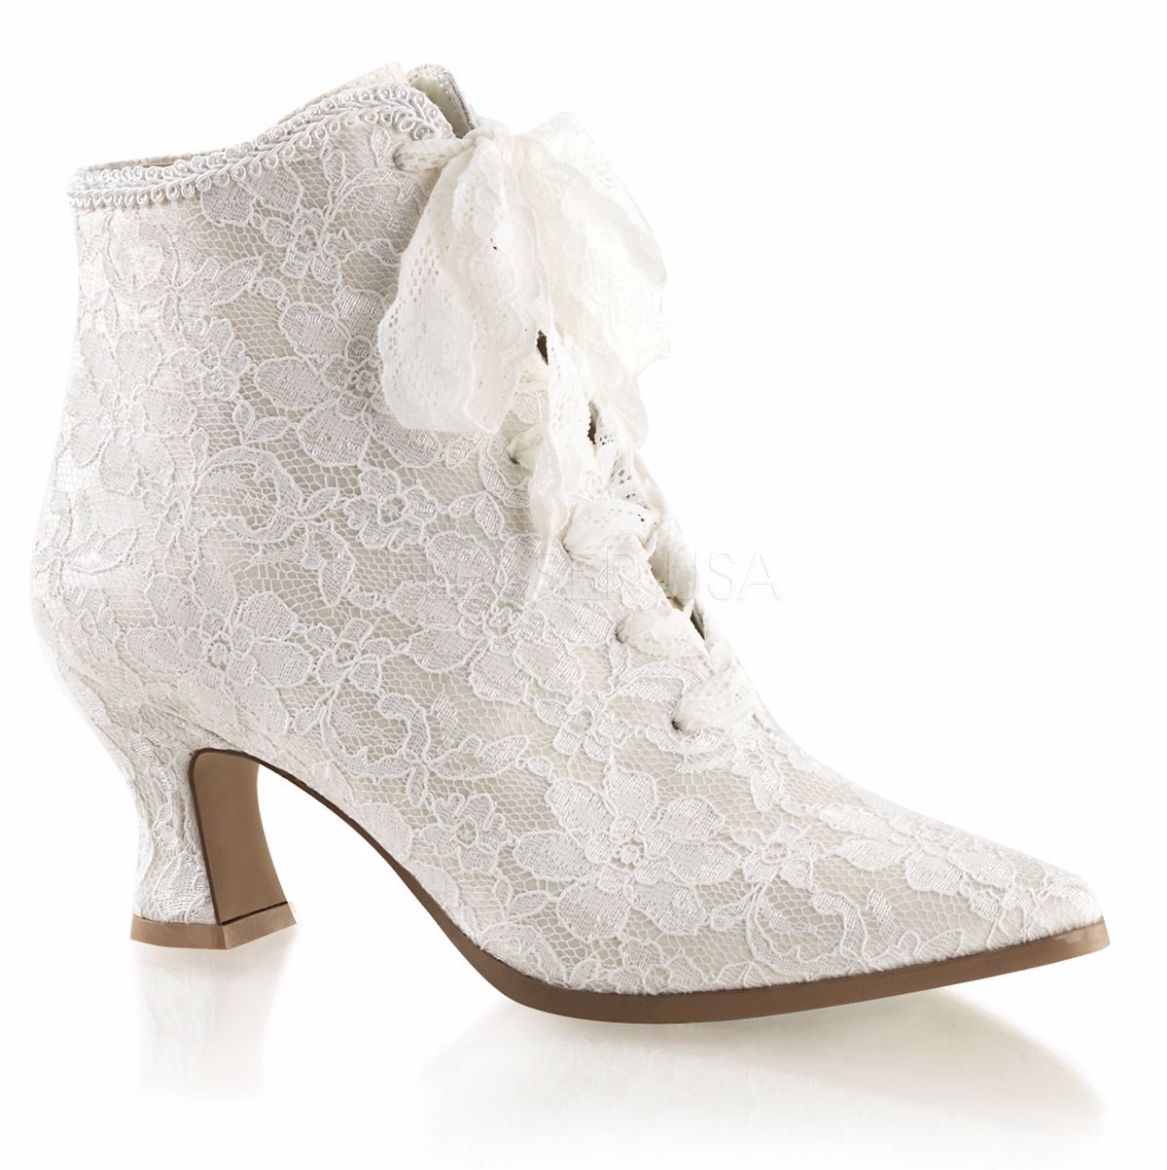 Product image of Fabulicious Victorian-30 Ivory Satin-Lace, 4 3/4 inch (12.1 cm) Heel, 1 inch (2.5 cm) Platform Ankle Boot